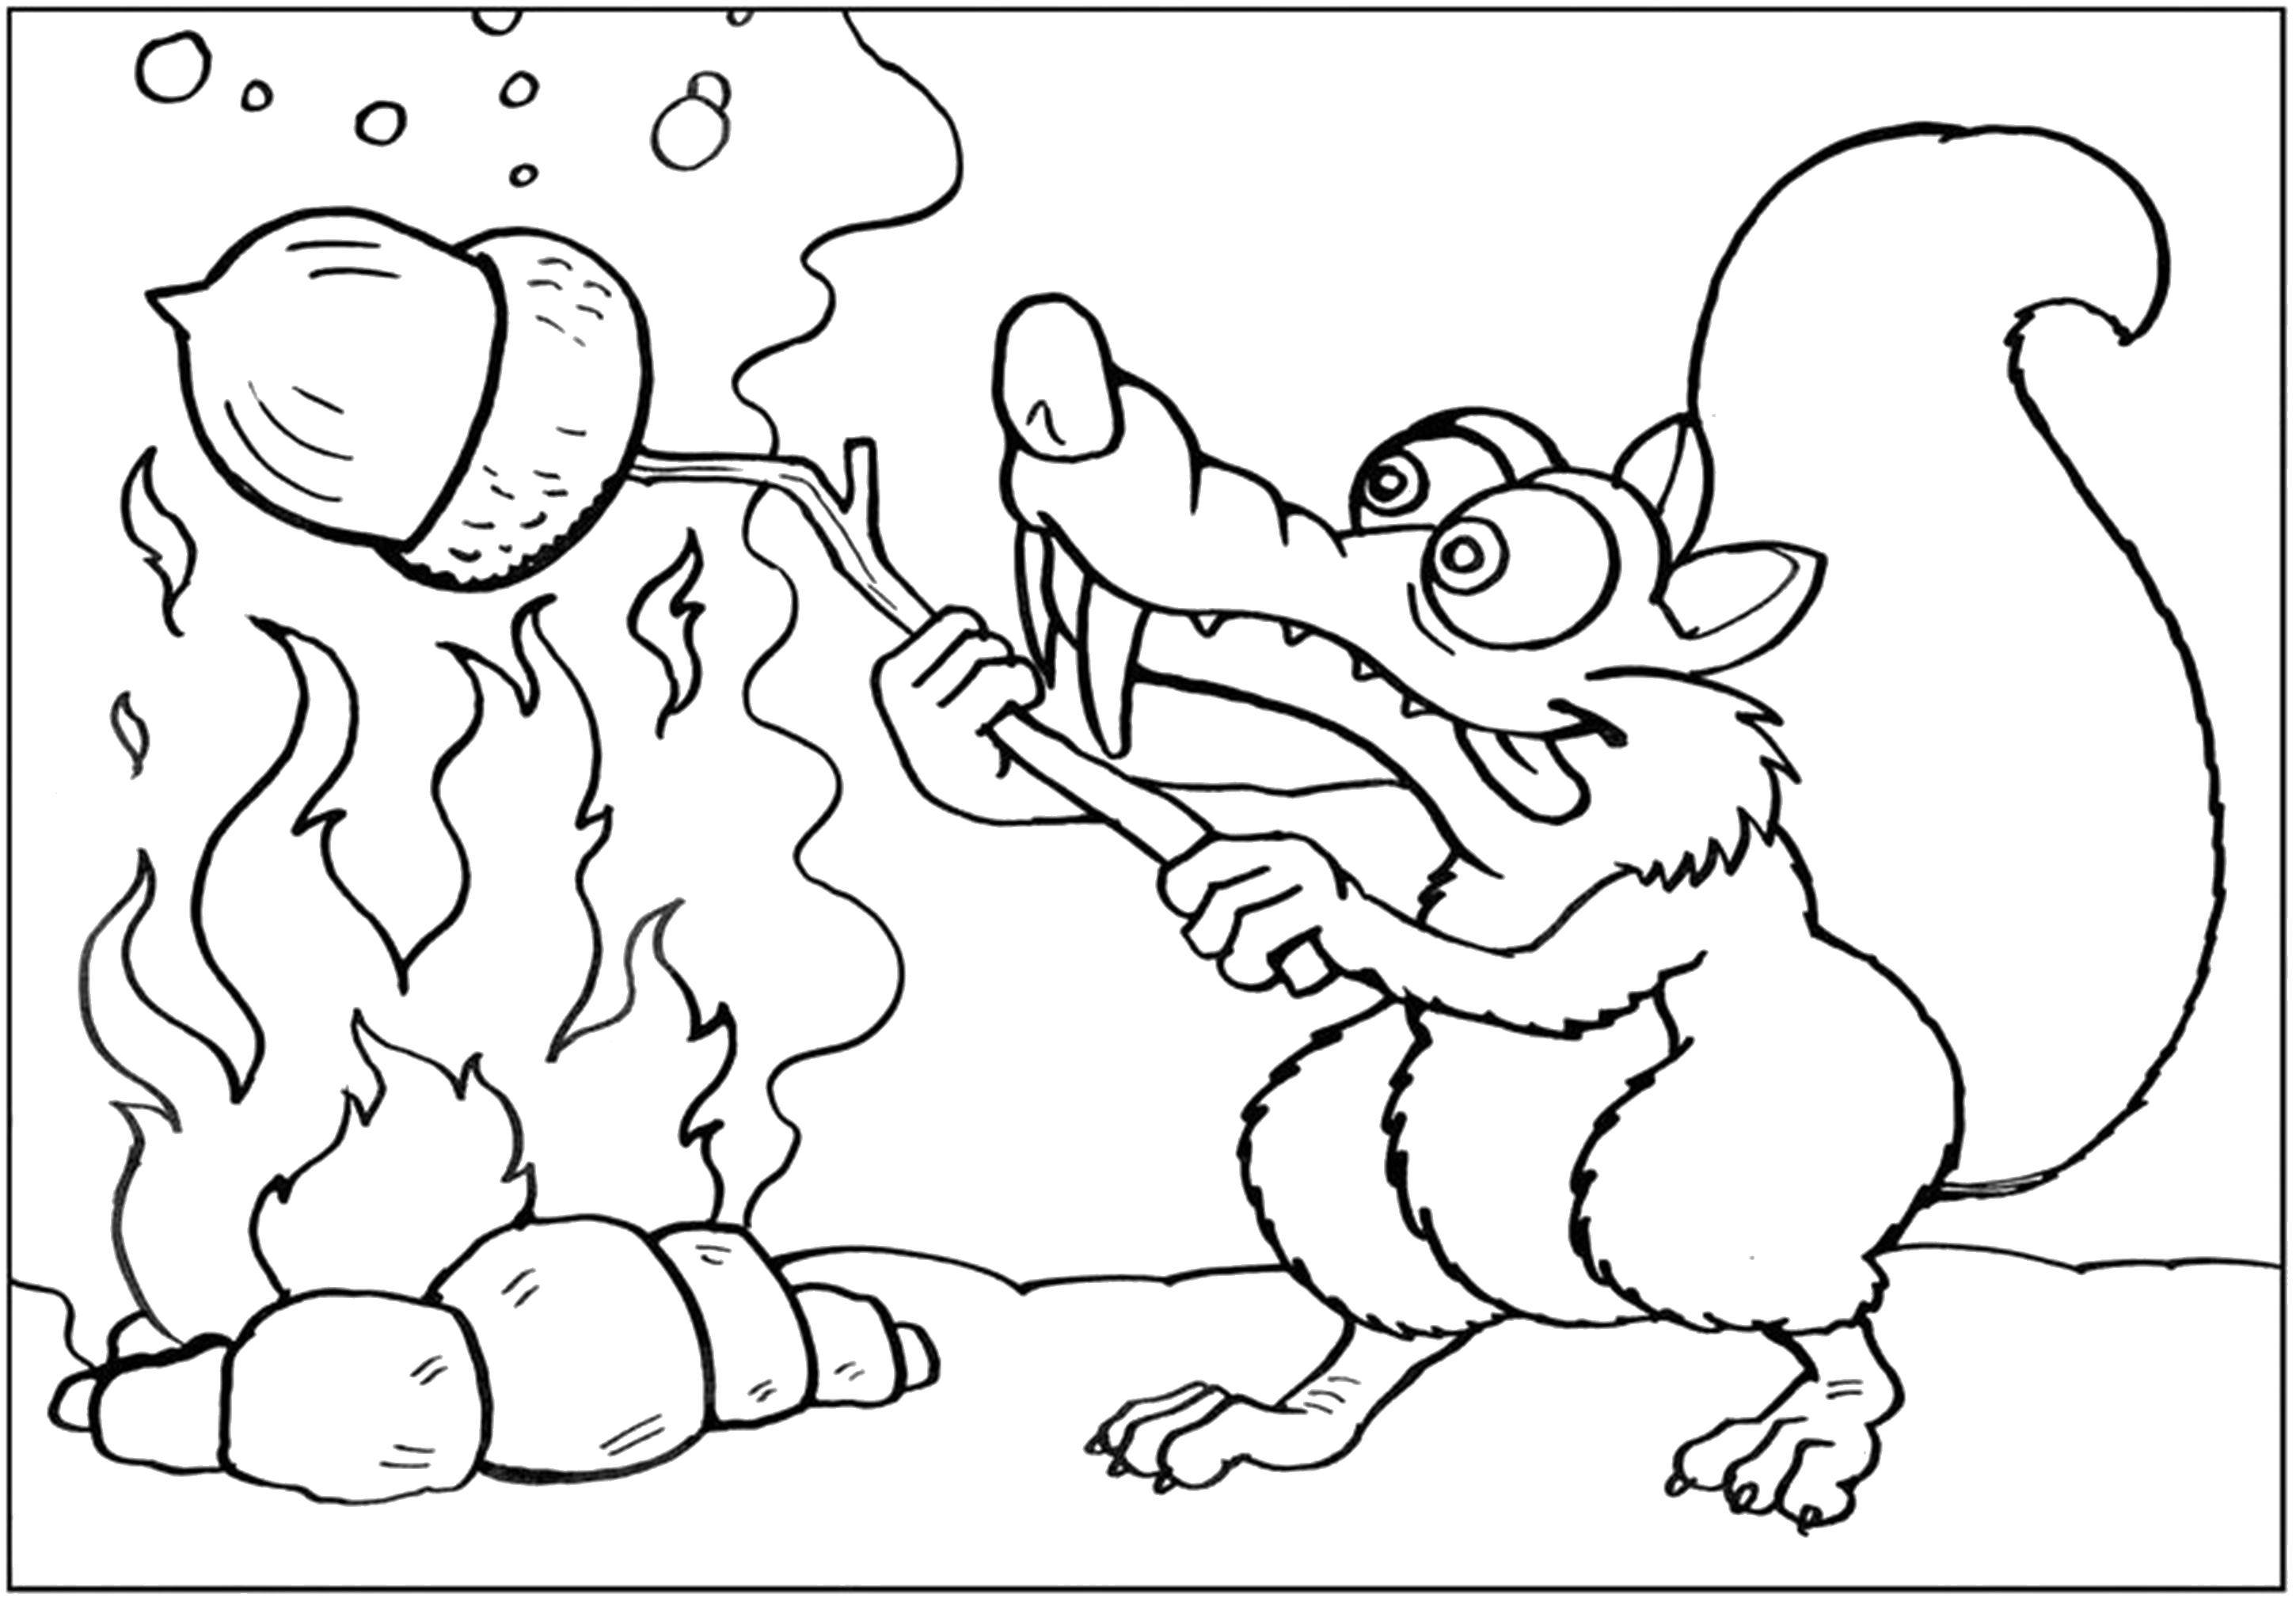 Coloring Squirrel from ice age. Category Disney coloring pages. Tags:  Disney, Ice age, squirrel.